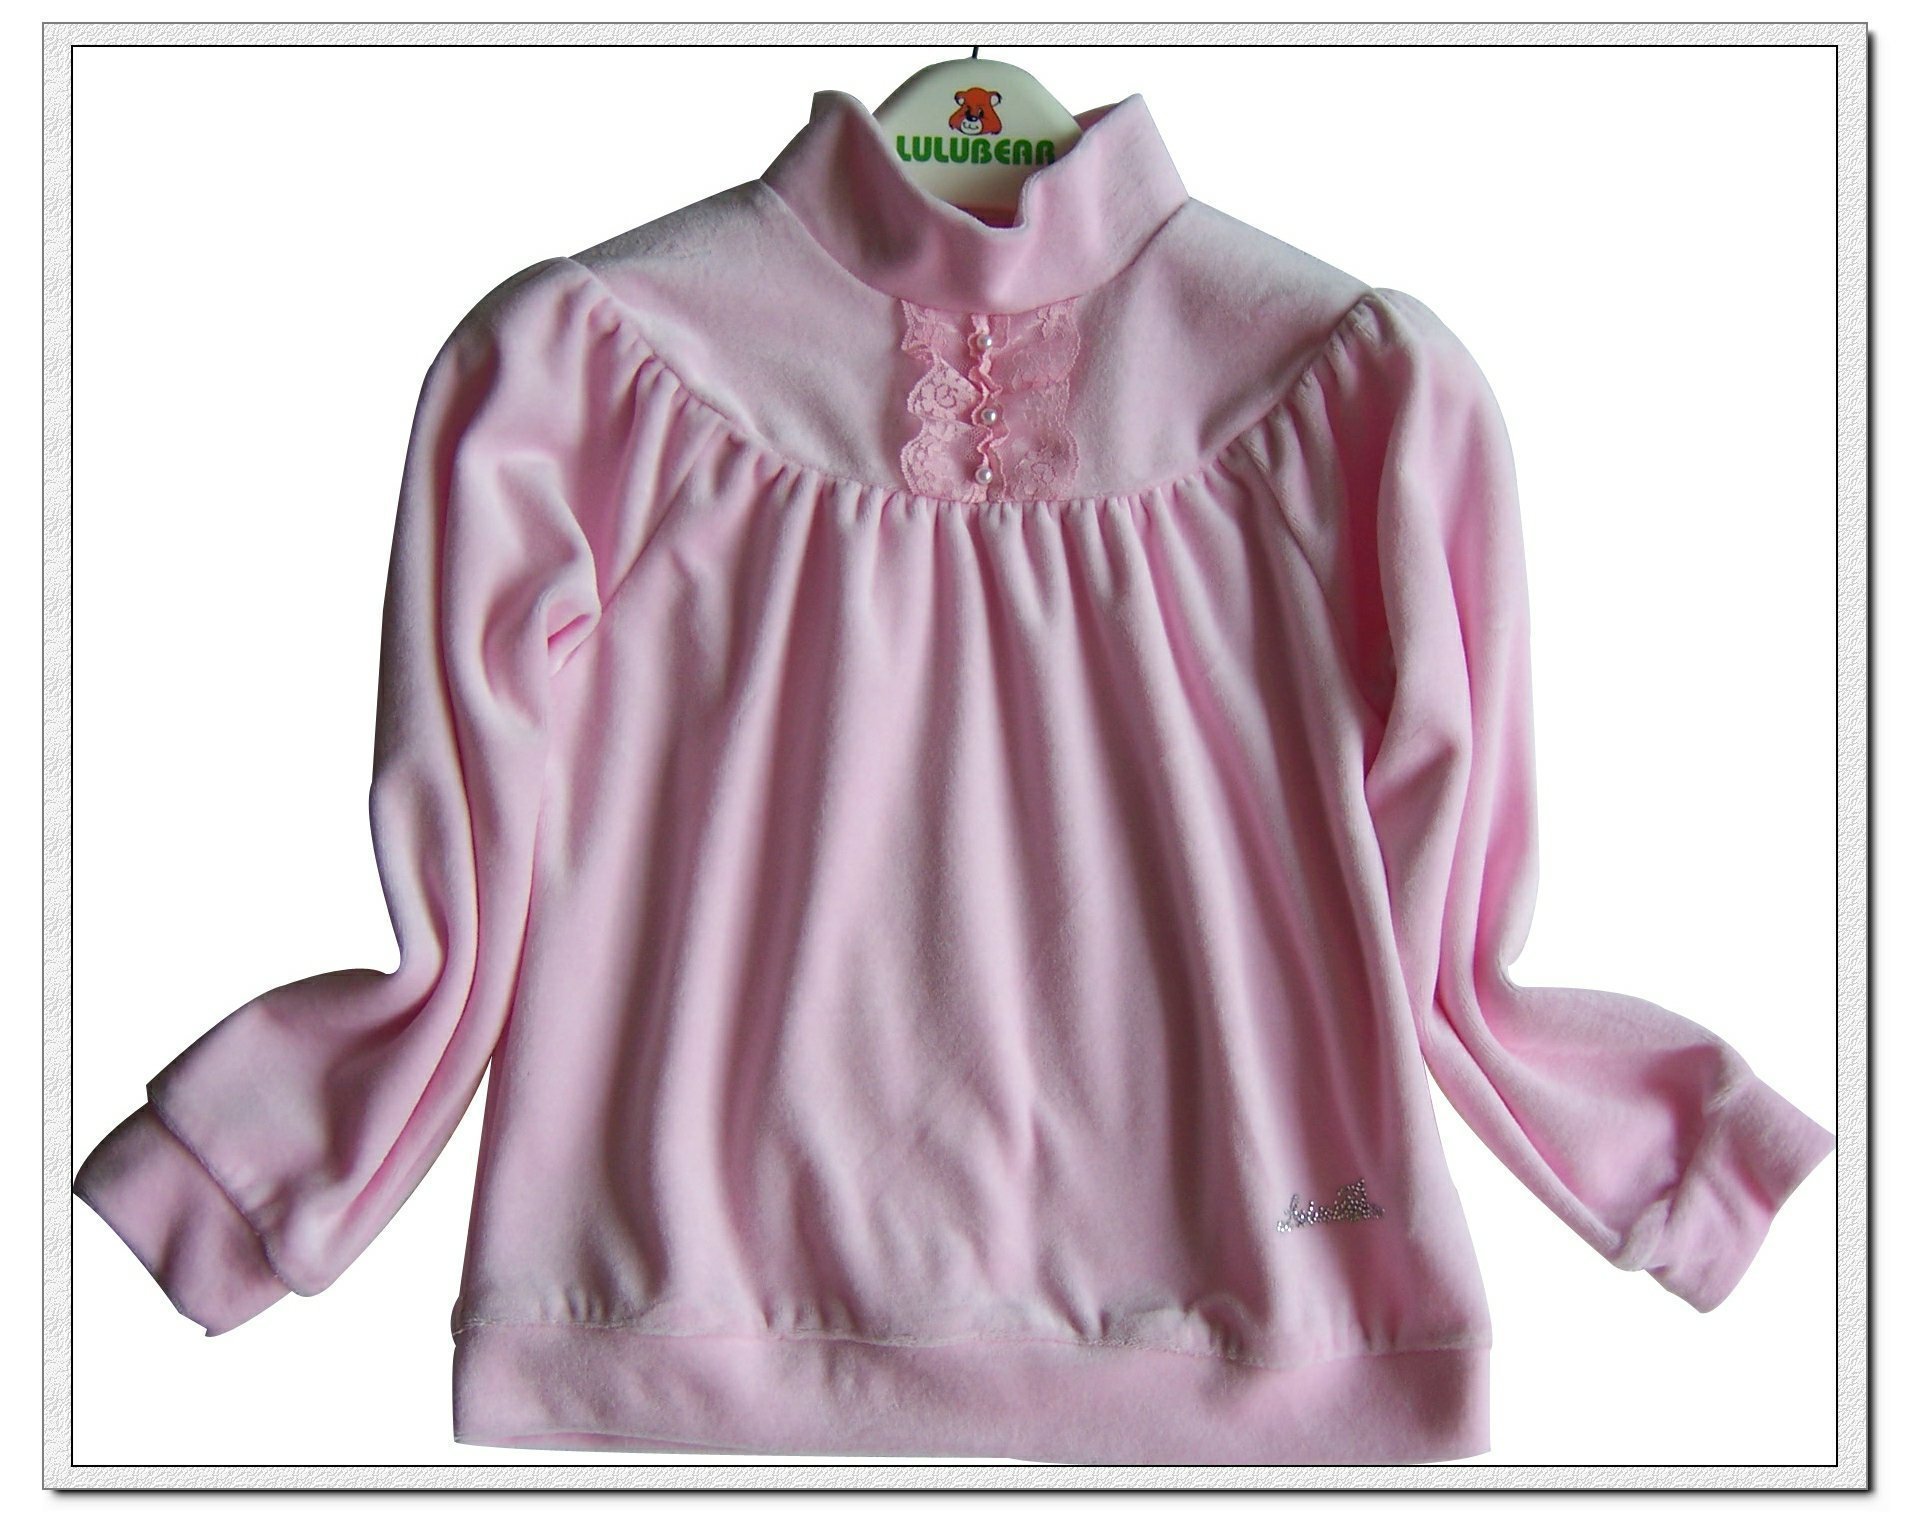 2012 autumn children's clothing casual fashion all-match 100% cotton pink long-sleeve T-shirt female free shipping